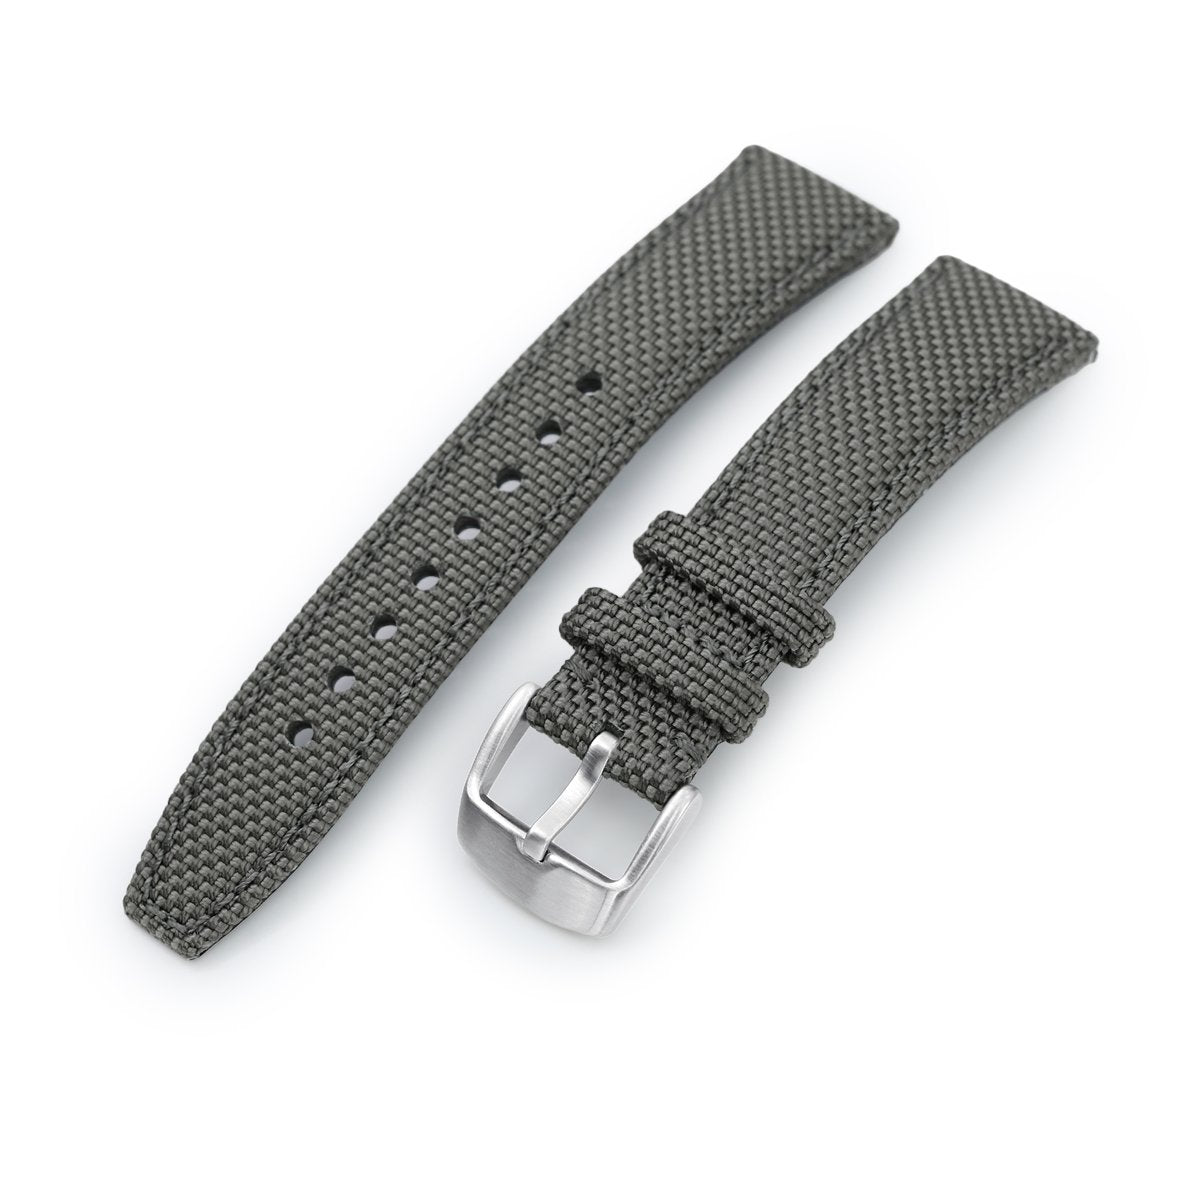 20mm 21mm or 22mm Strong Texture Woven Nylon Military Grey Watch Strap Brushed Strapcode Watch Bands